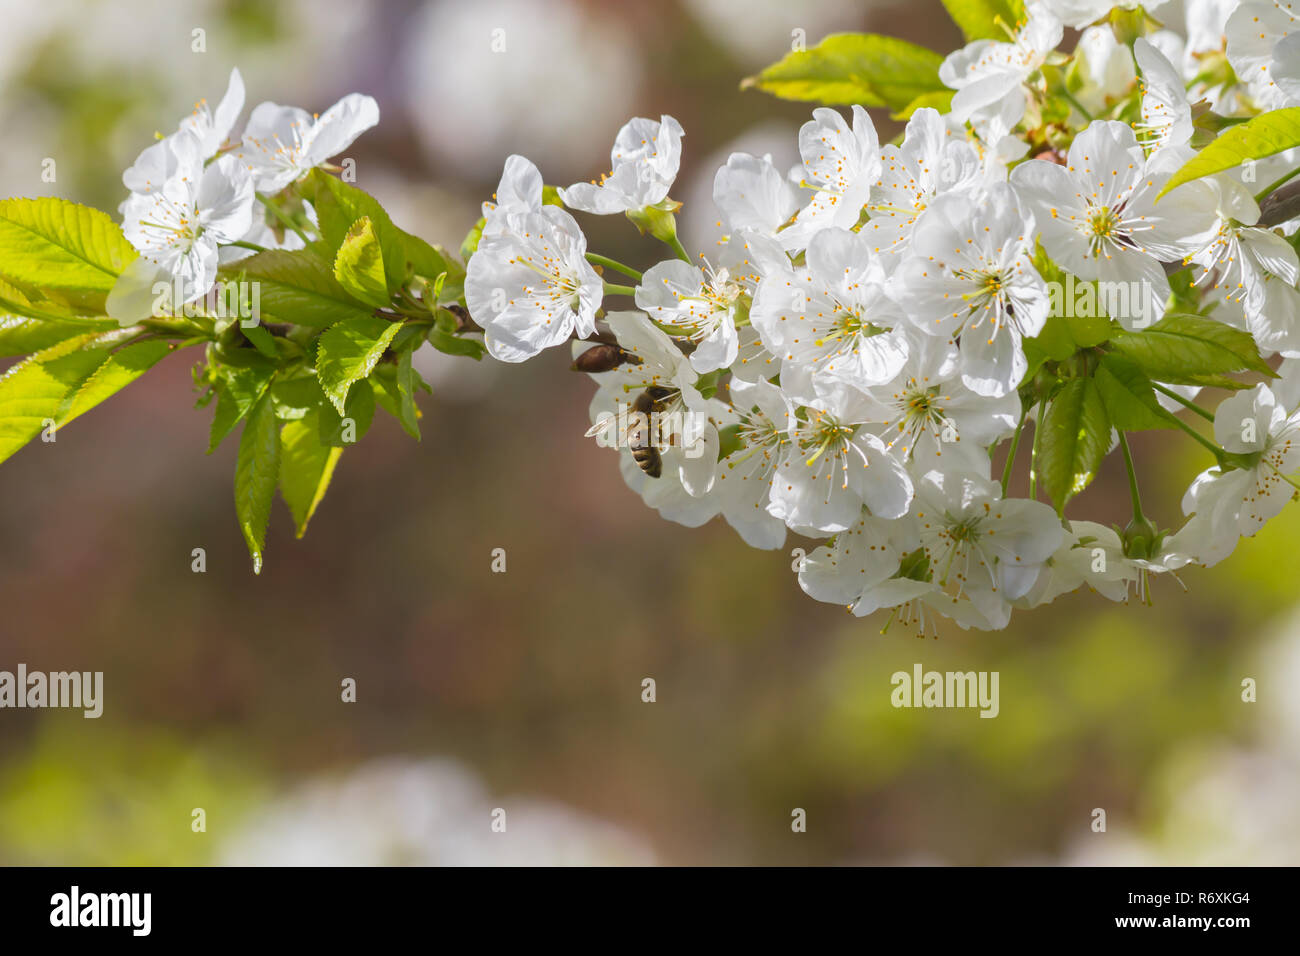 Bees and cherry blossoms Stock Photo